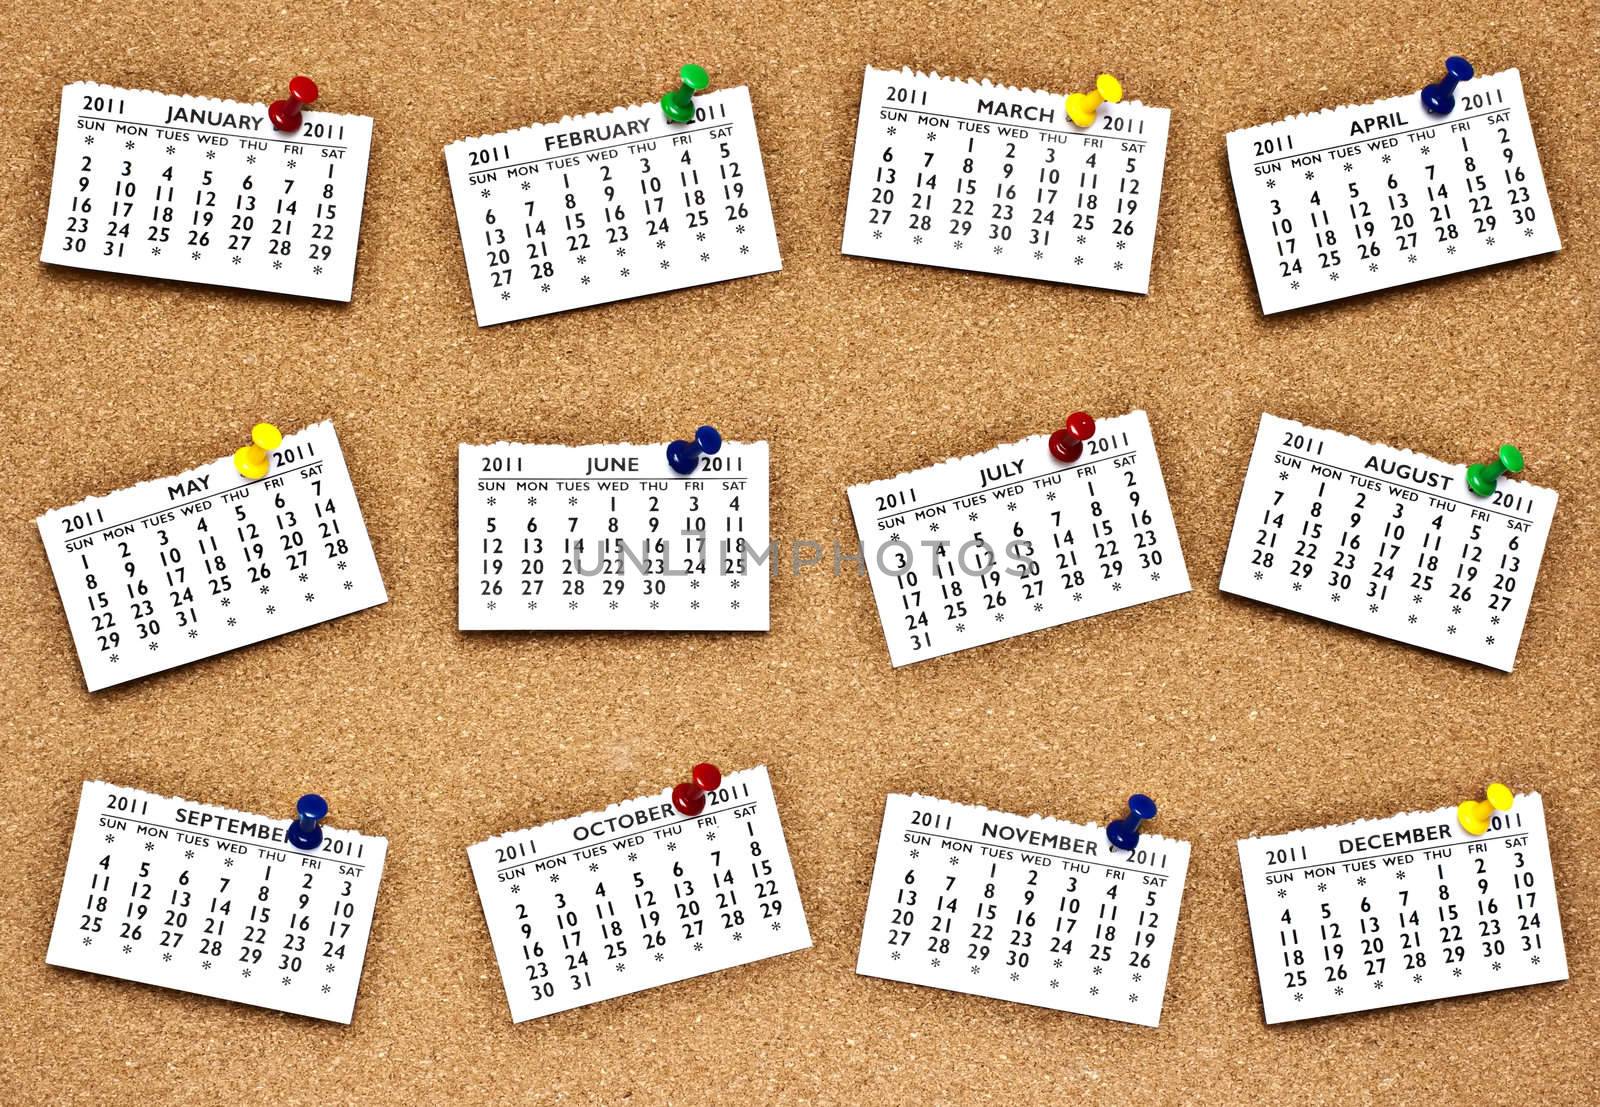 Information on the bulletin board pin 2011 year calendar months.
